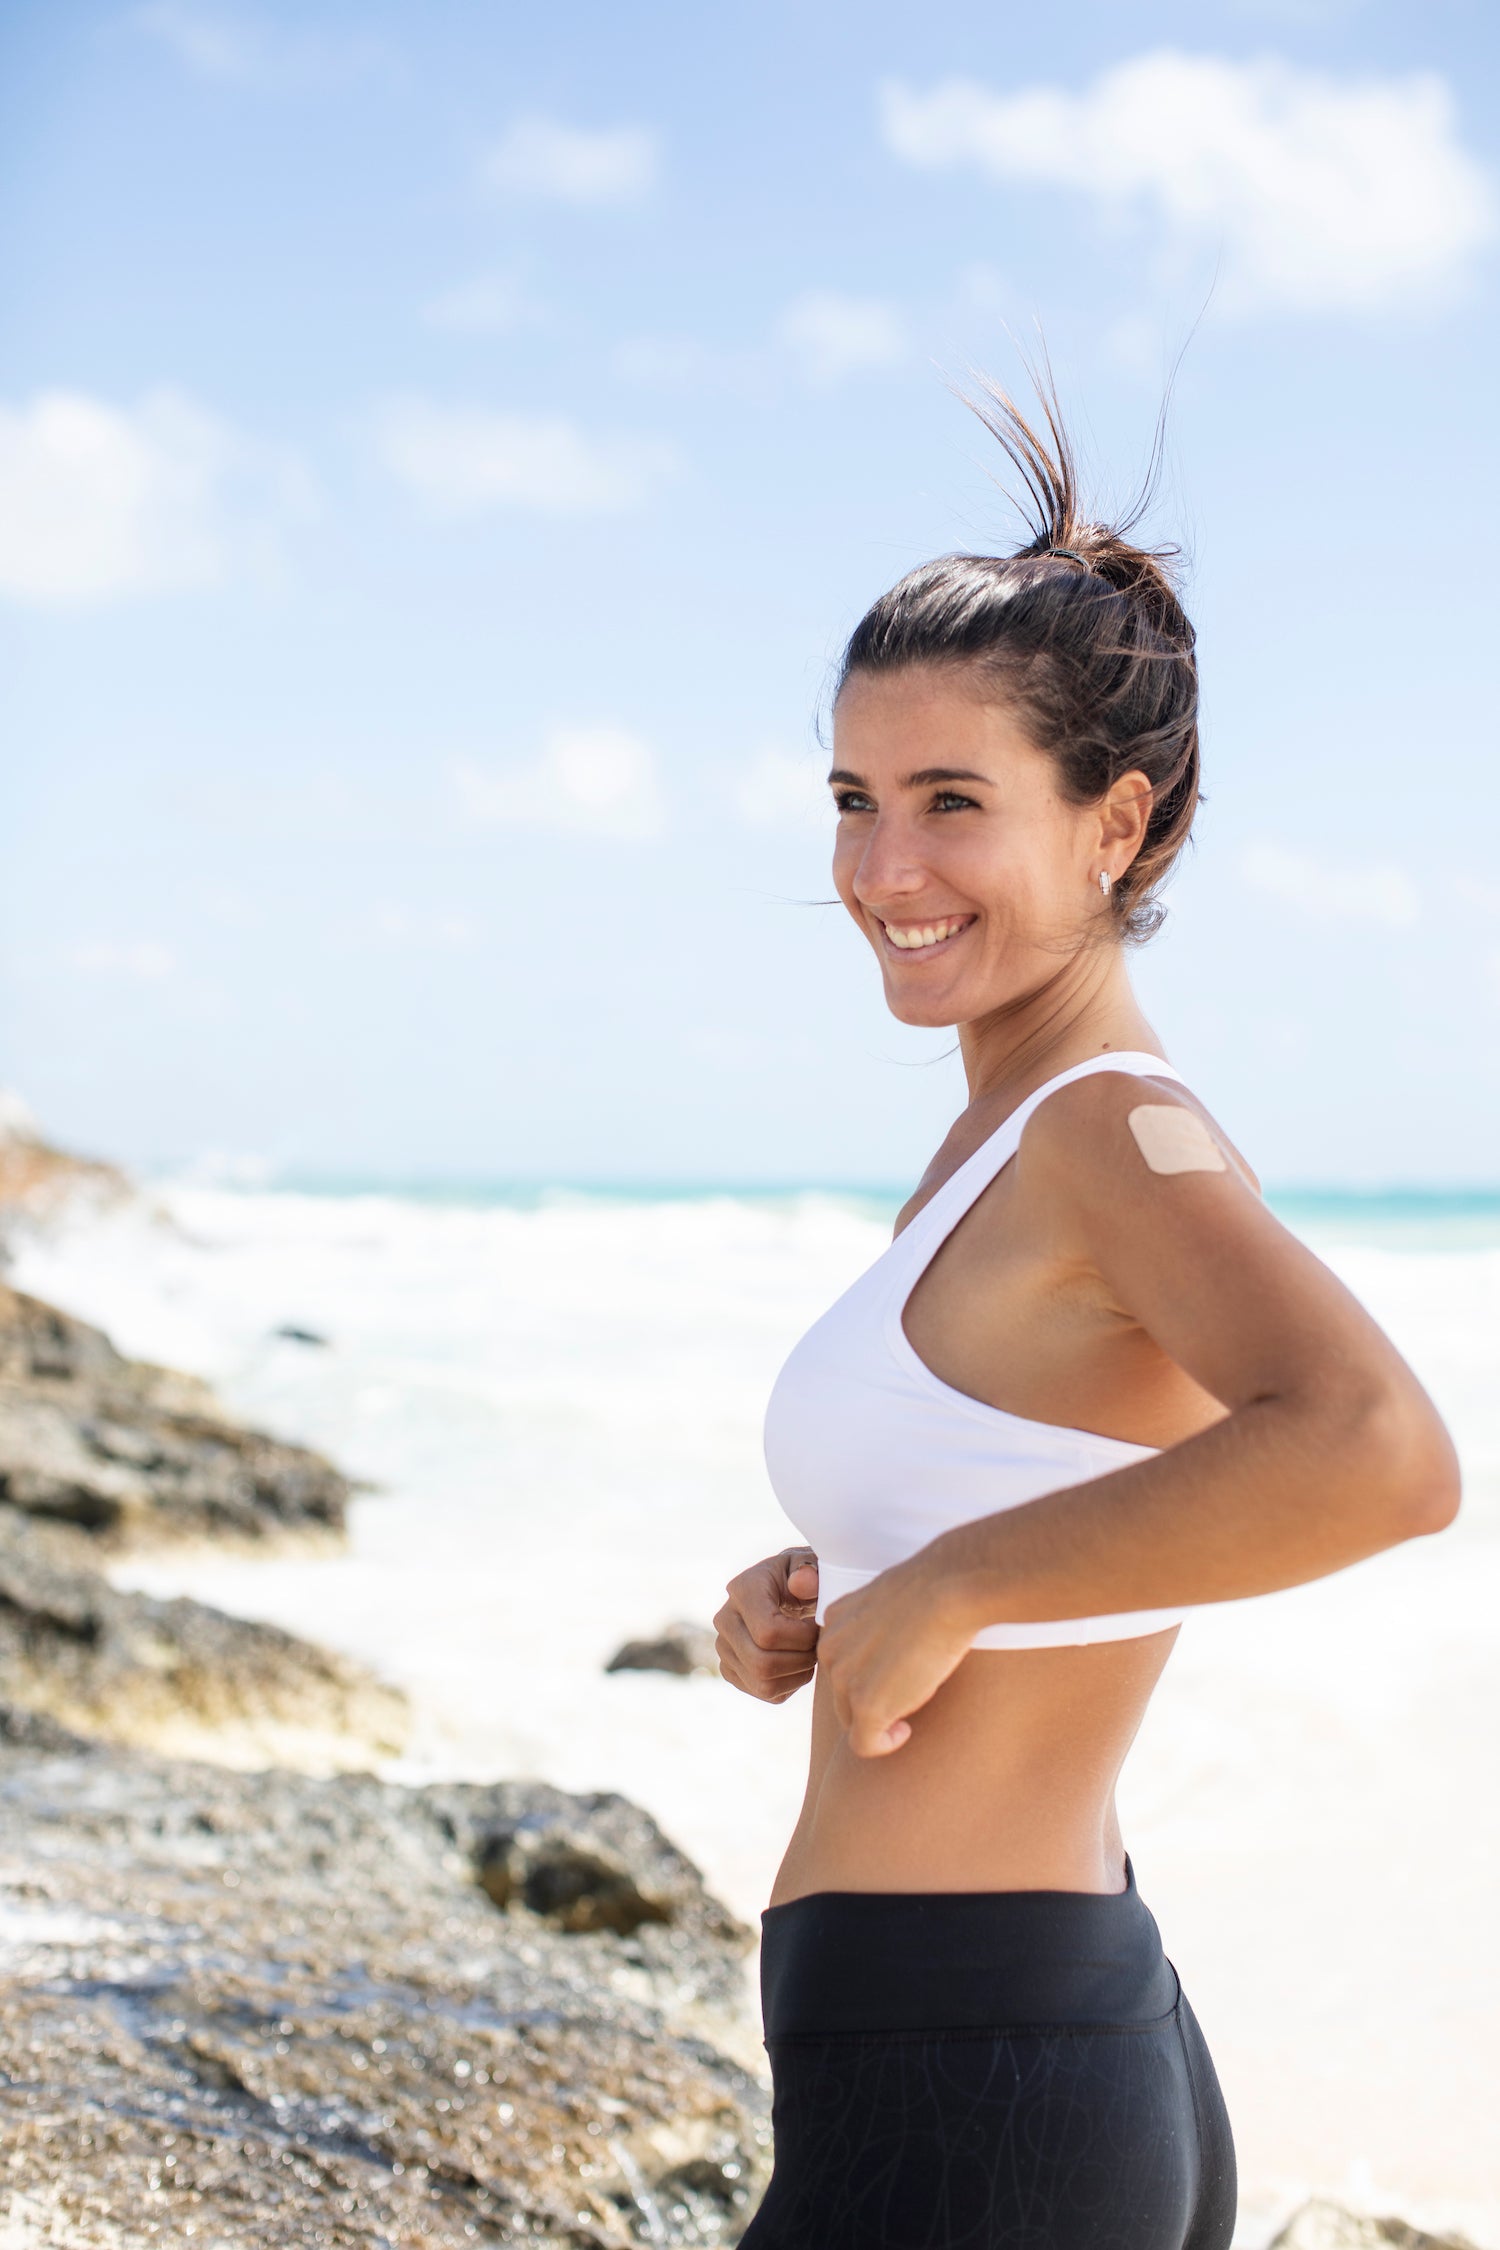 Fit, athletic young woman with brown hair, exercising on the beach, wearing an Affix Patch on her shoulder, looking joyful